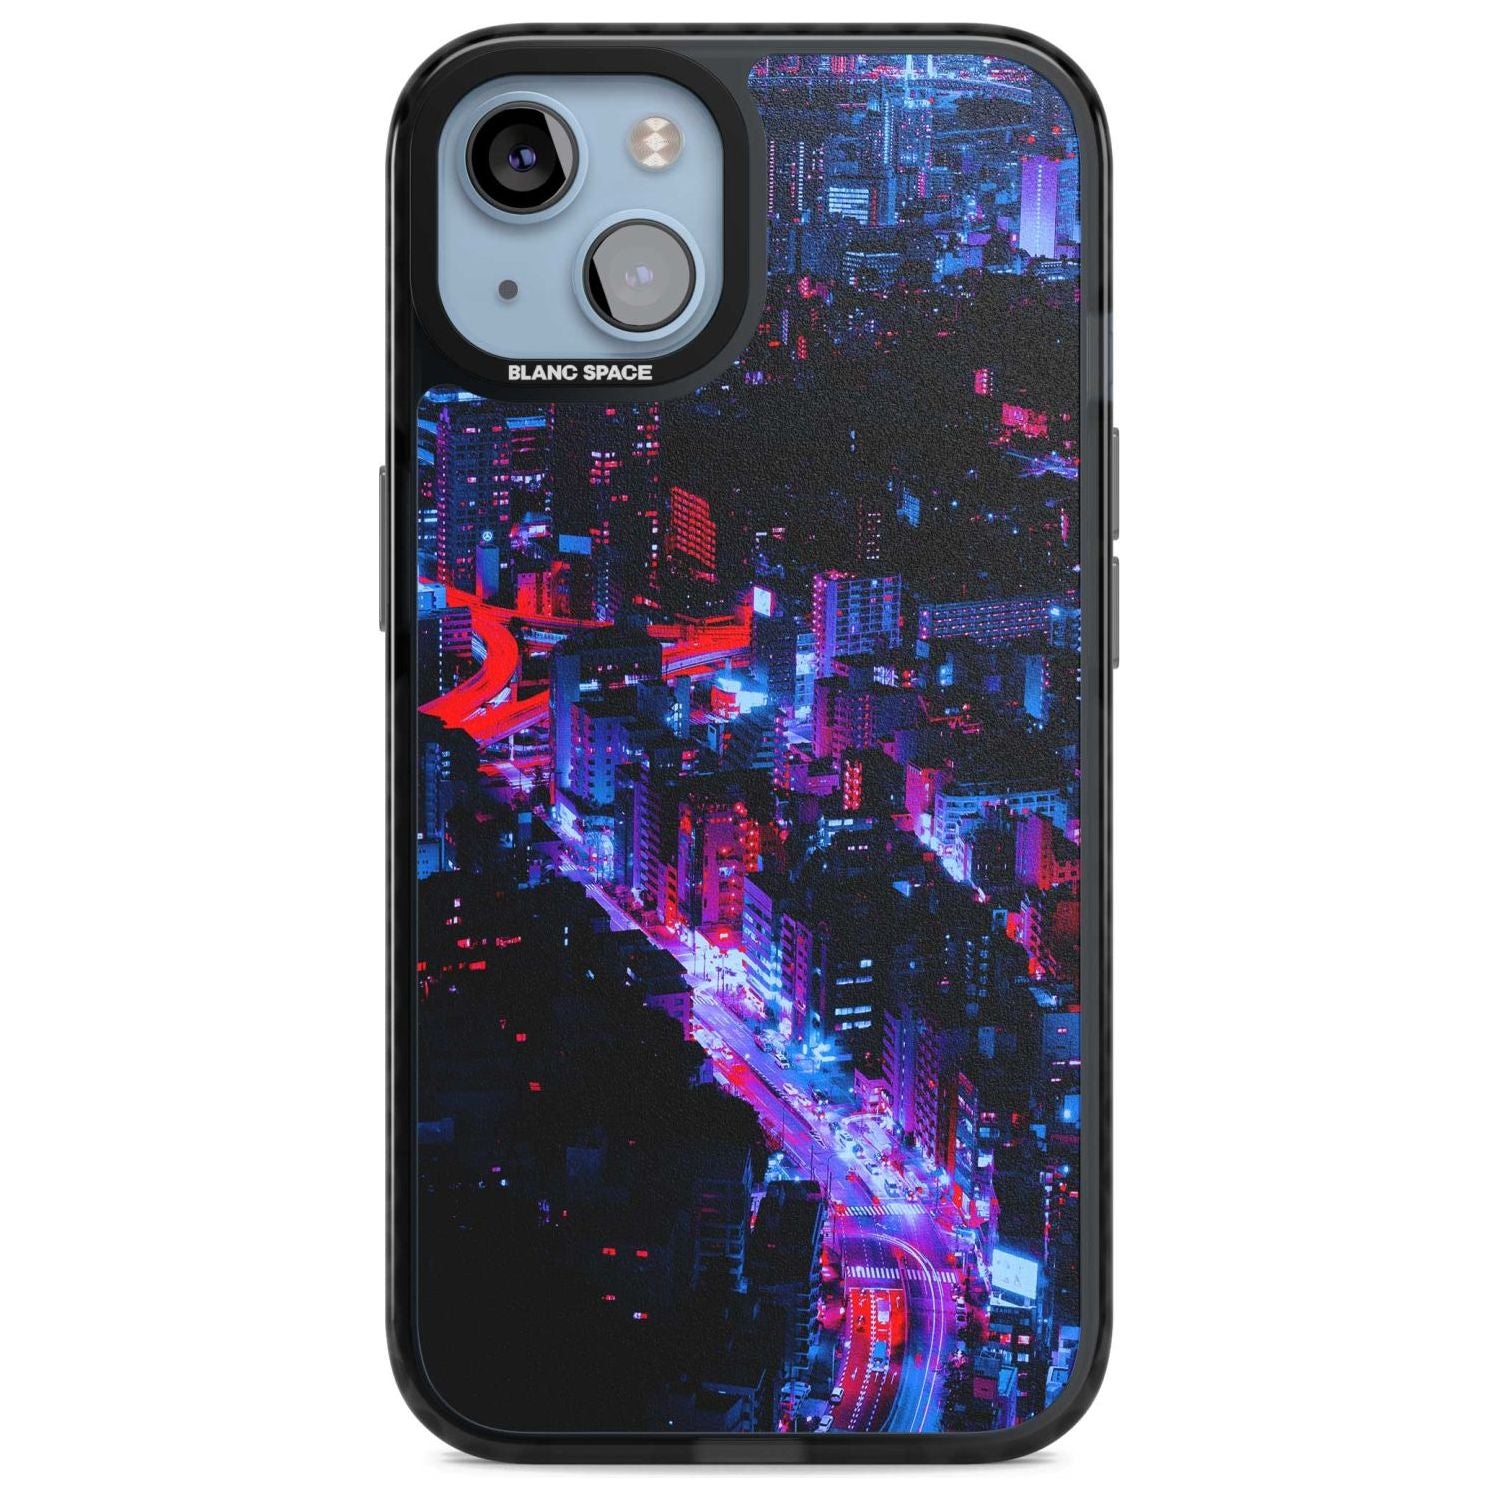 Arial City View - Neon Cities Photographs Phone Case iPhone 15 Plus / Magsafe Black Impact Case,iPhone 15 / Magsafe Black Impact Case,iPhone 14 Plus / Magsafe Black Impact Case,iPhone 14 / Magsafe Black Impact Case,iPhone 13 / Magsafe Black Impact Case Blanc Space